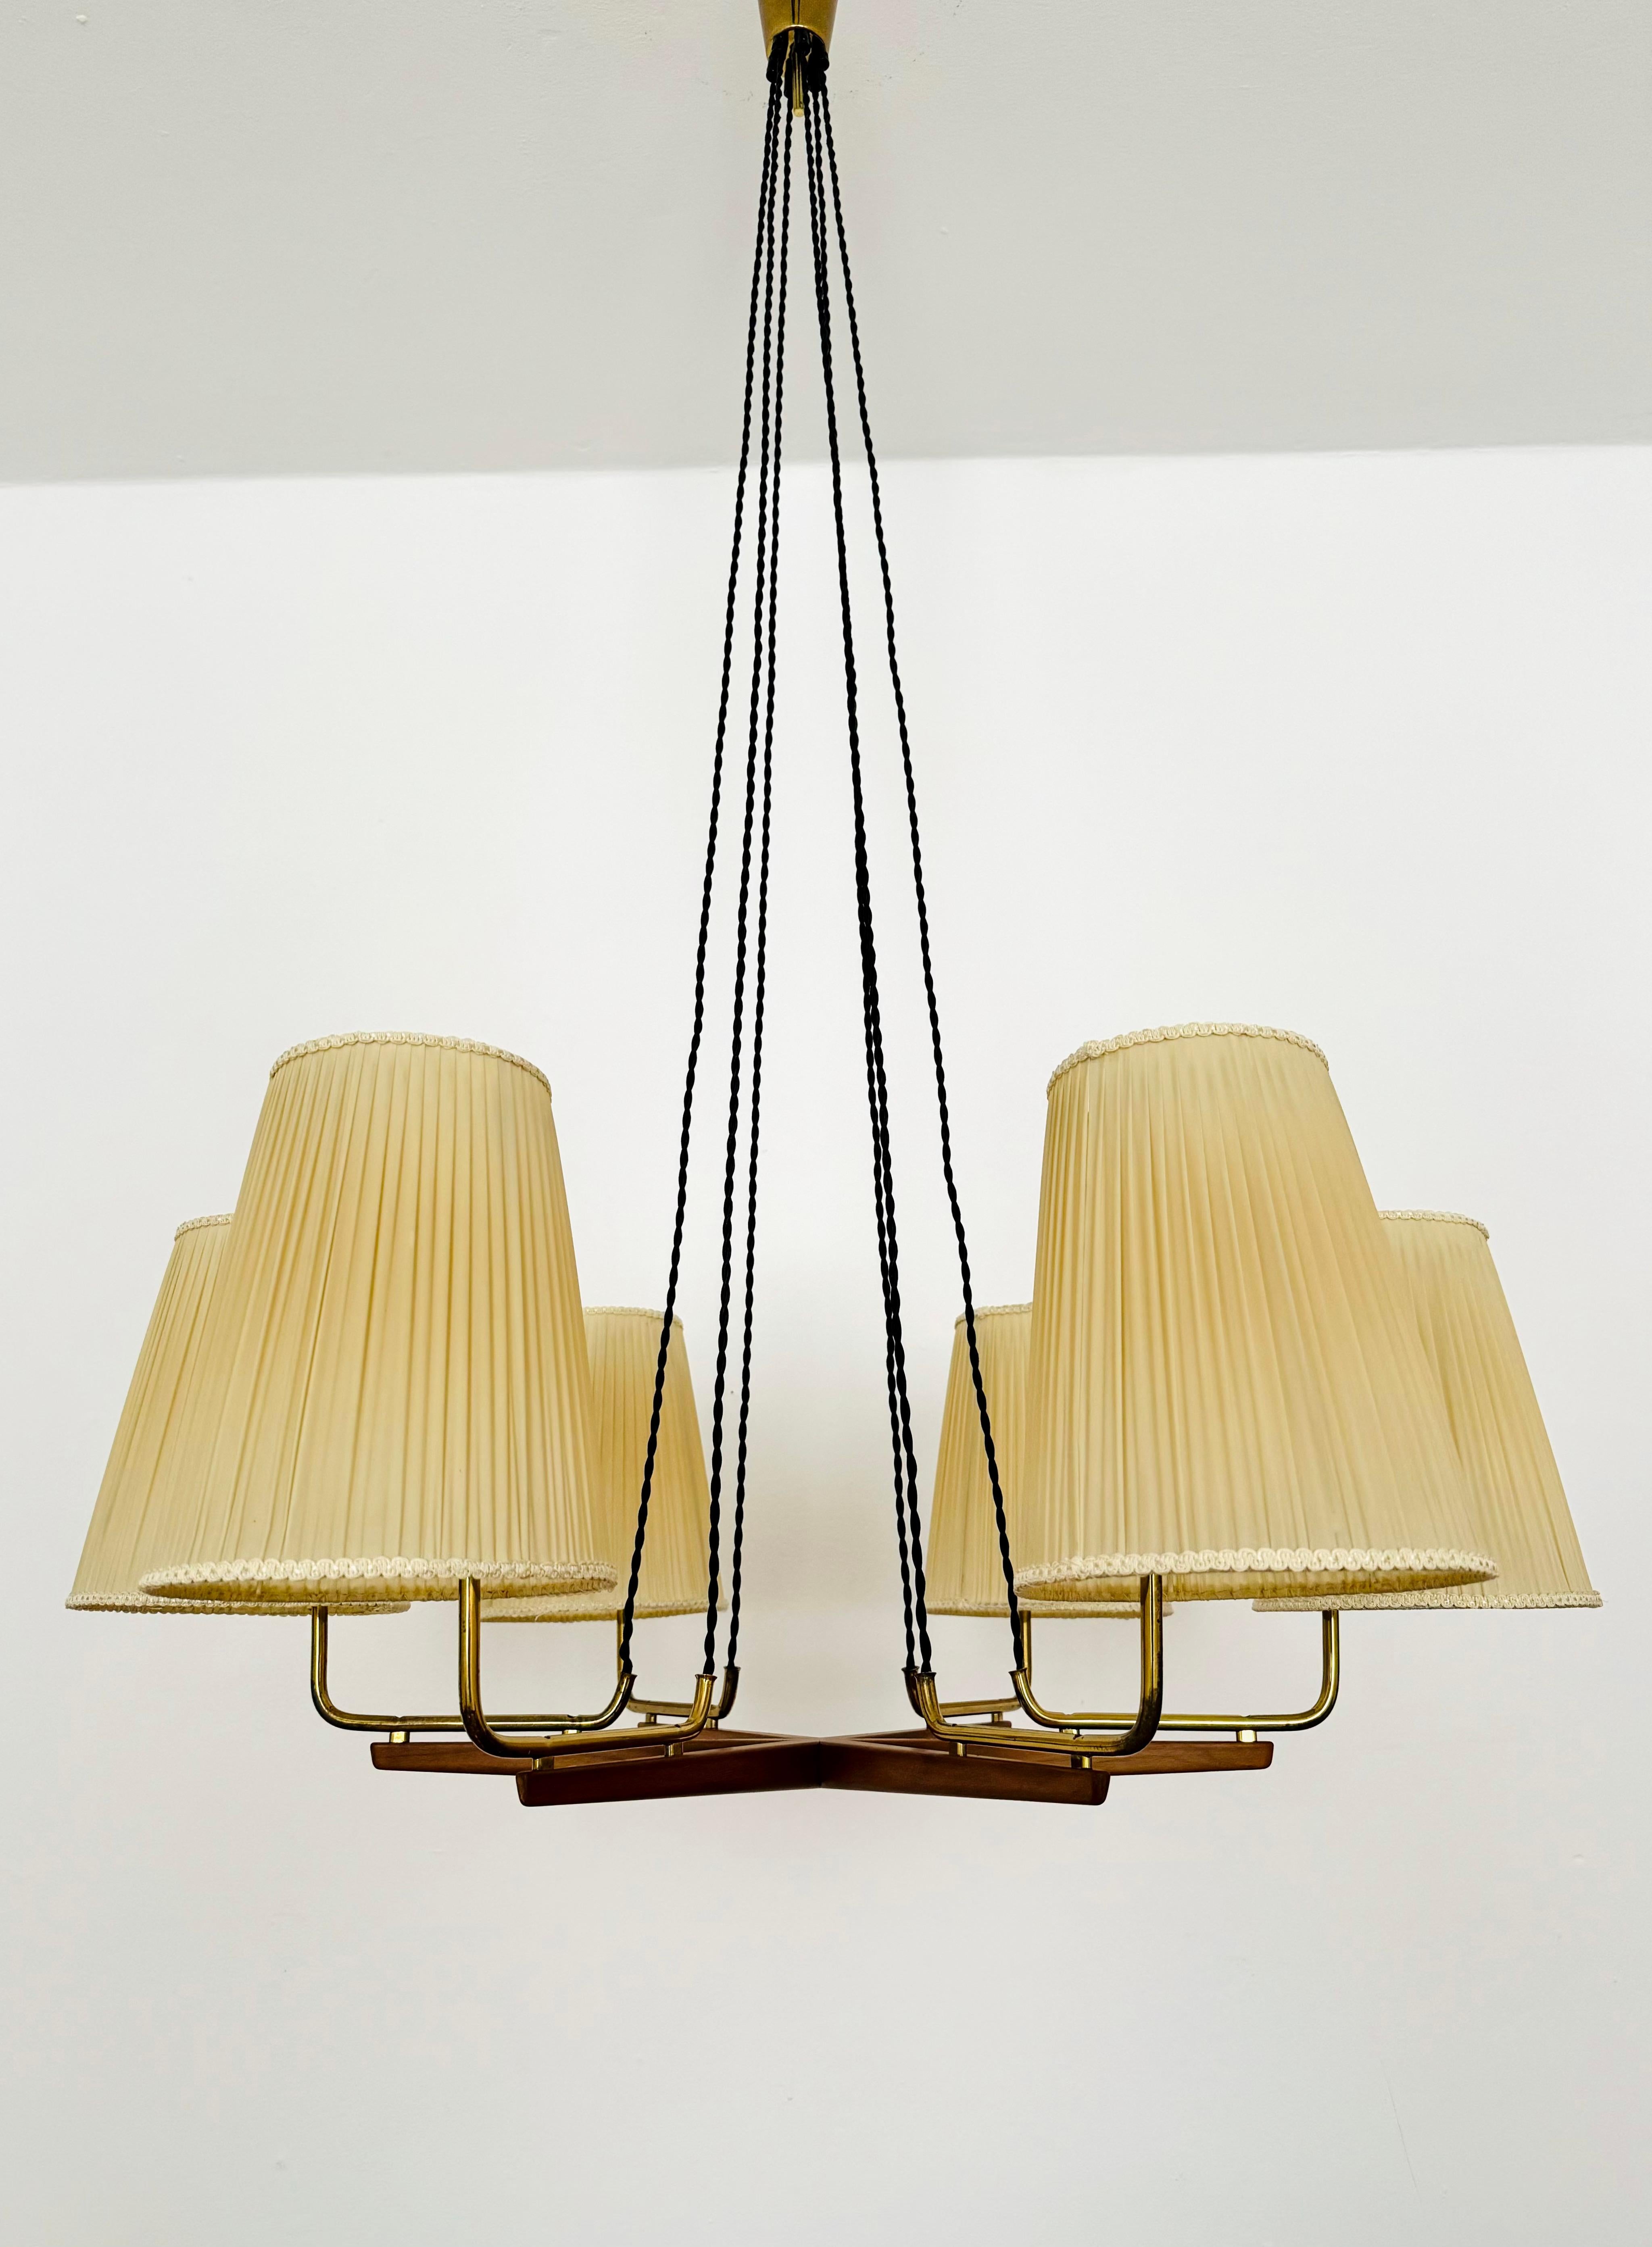 Wonderful and very rare chandelier from the 1950s.
The very large lamp with the floating pleated lampshades is a real asset and an absolute favorite piece for every home.
A very pleasant and warm light is created.

Manufacturer: Kalmar
Design: